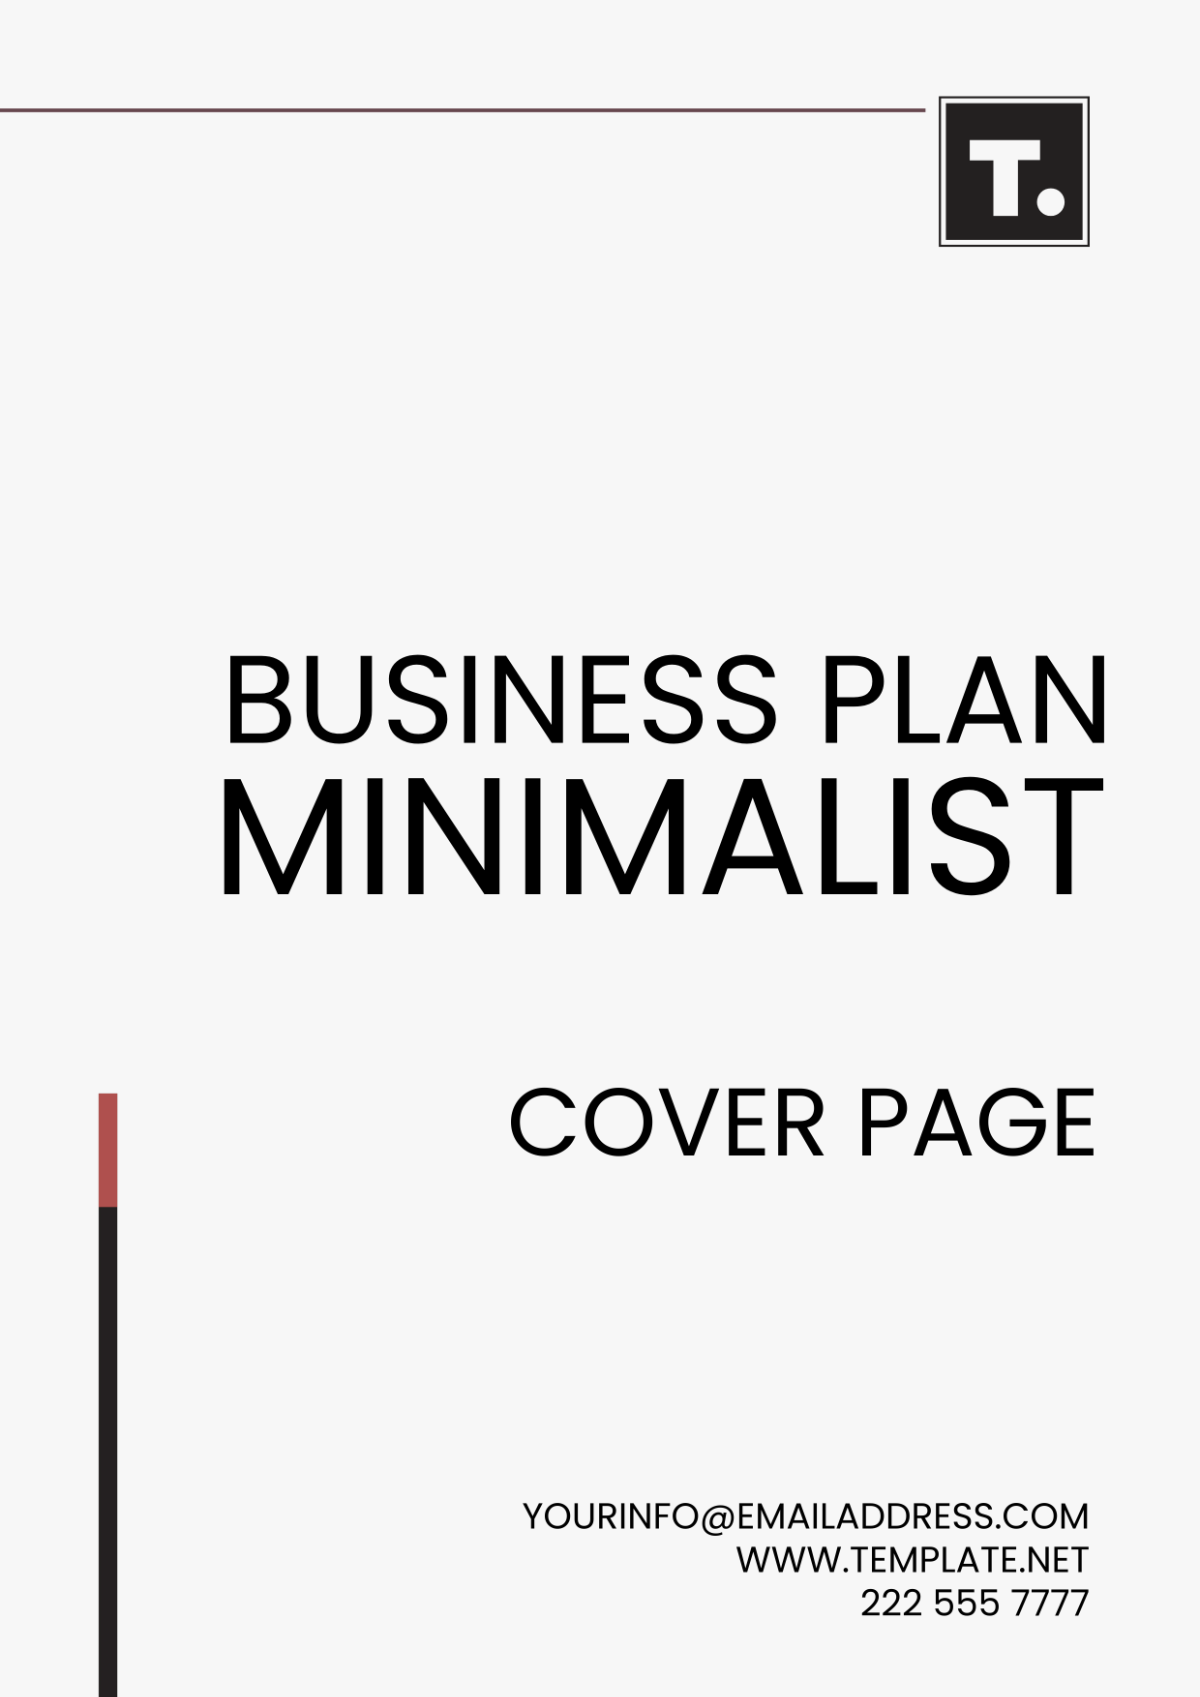 Business Plan Minimalist Cover Page